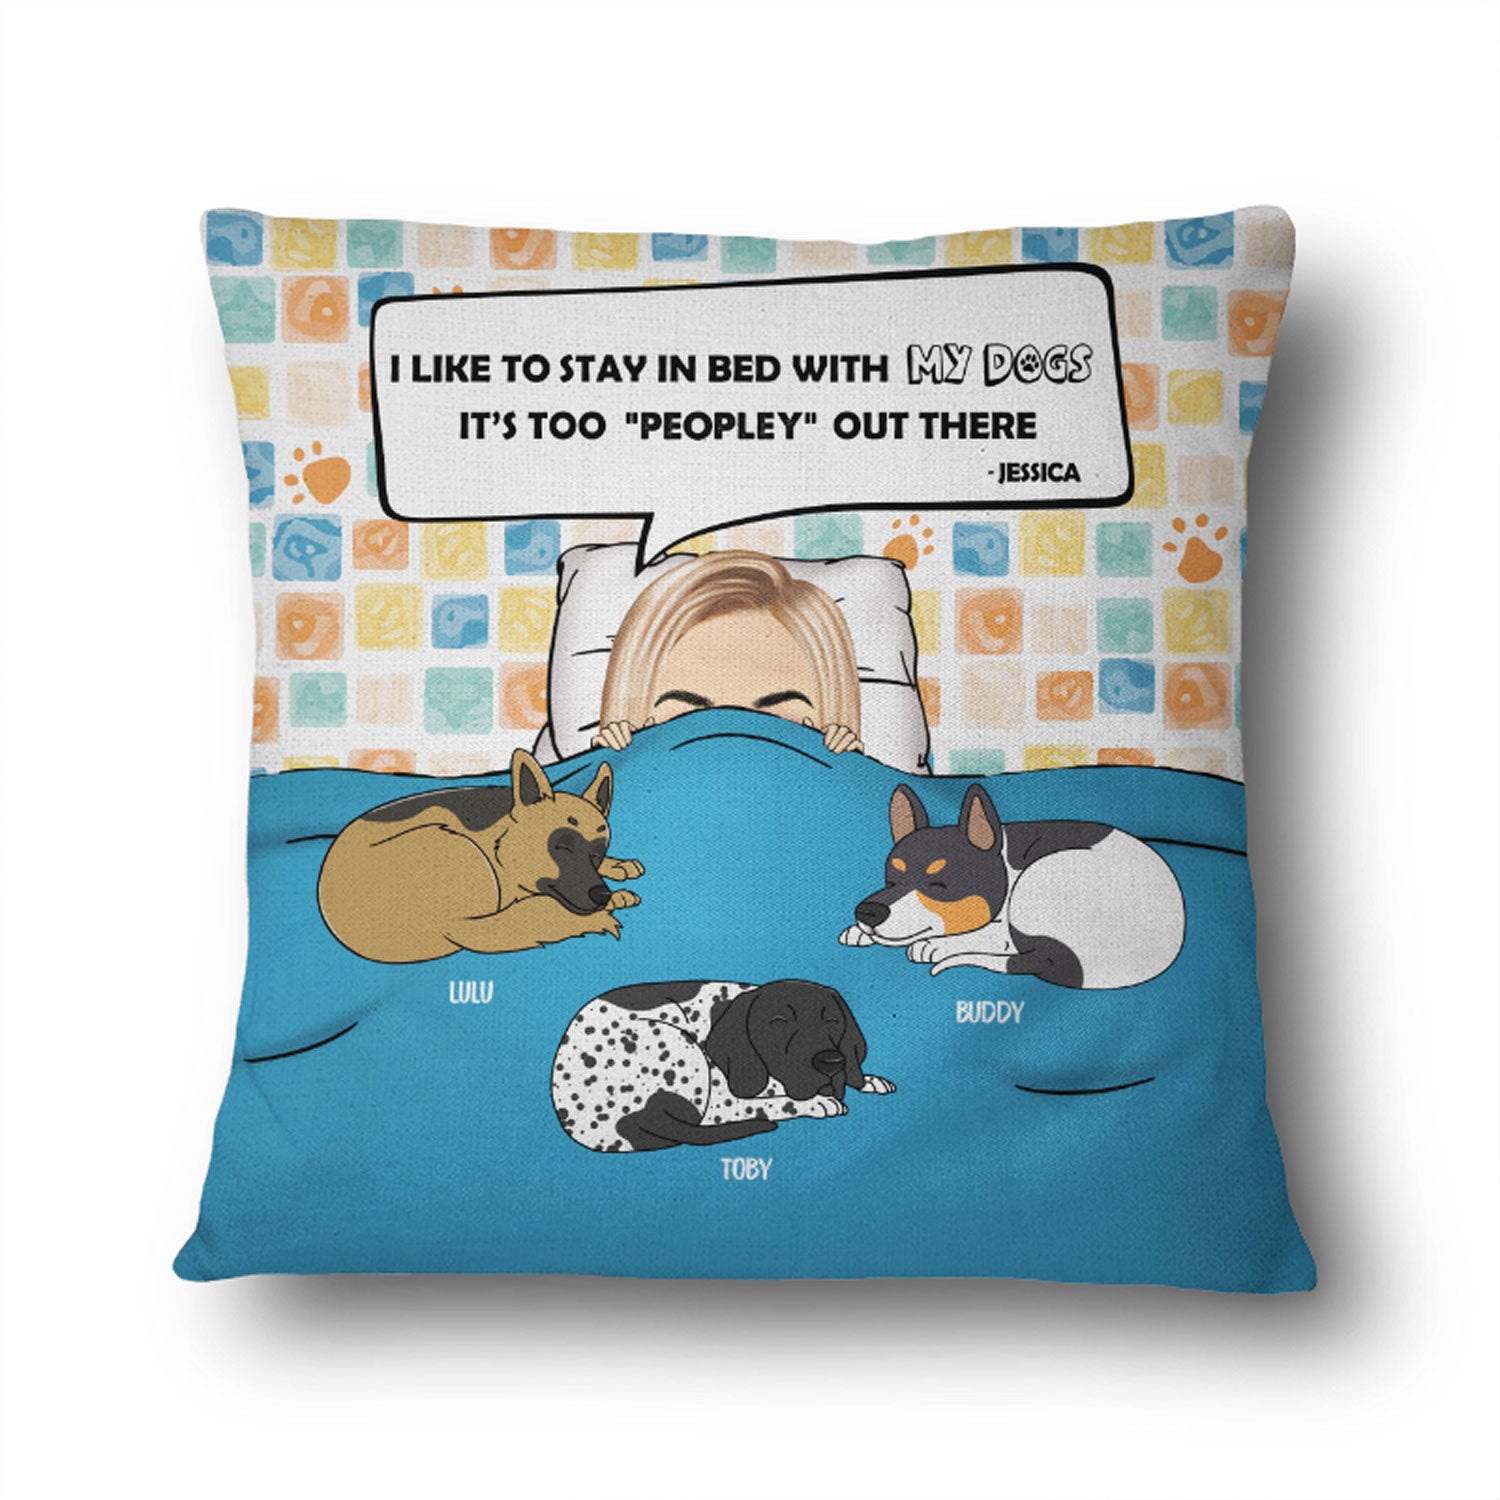 Sleeping Dog Stay In Bed With - Gift For Dog Lovers - Personalized Custom Pillow